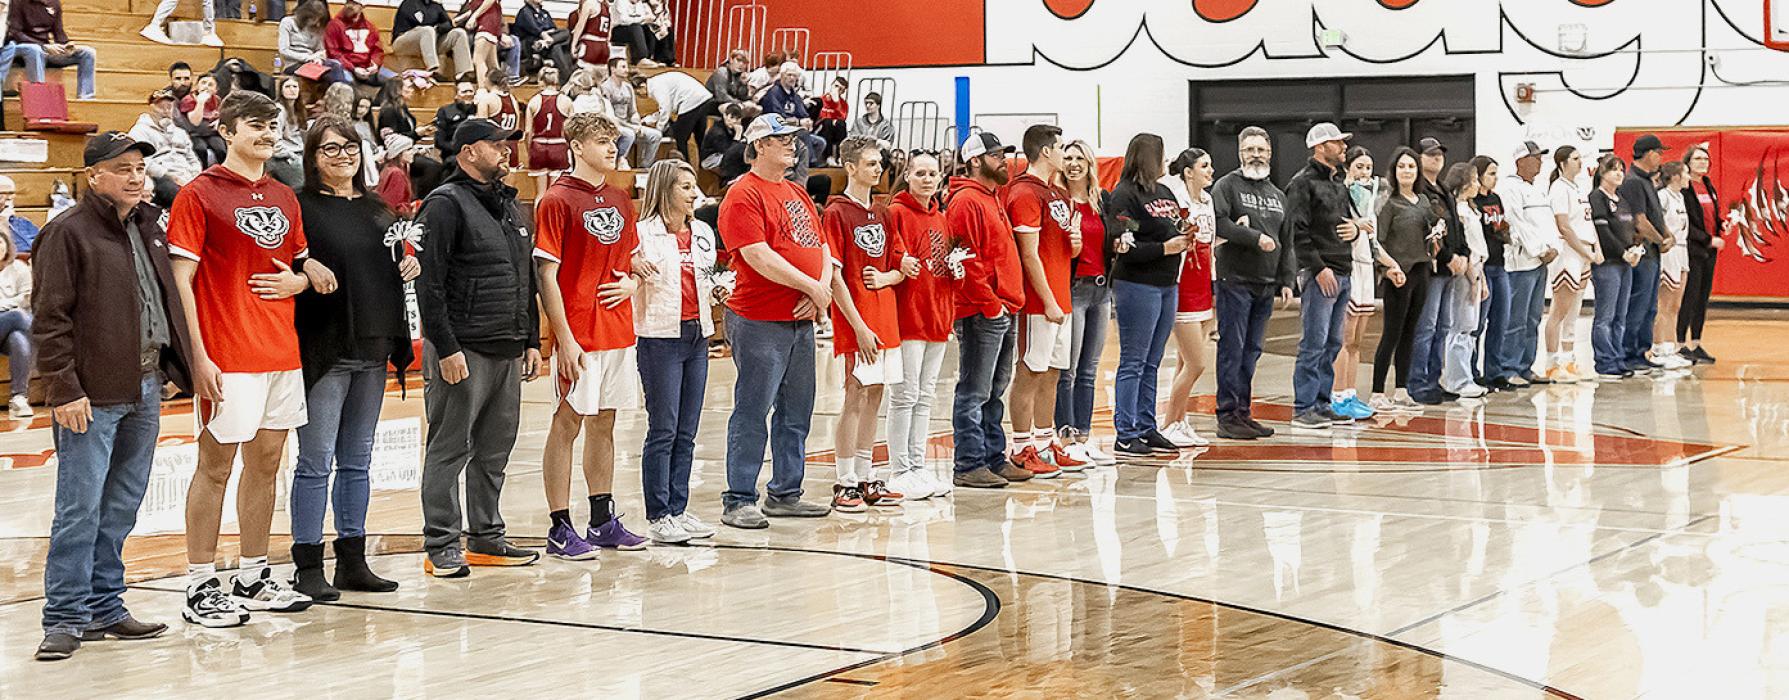 Between the girls and boys games, parents were brought out to the court for the senior’s Parents Night! Thank you for all you do for your students!